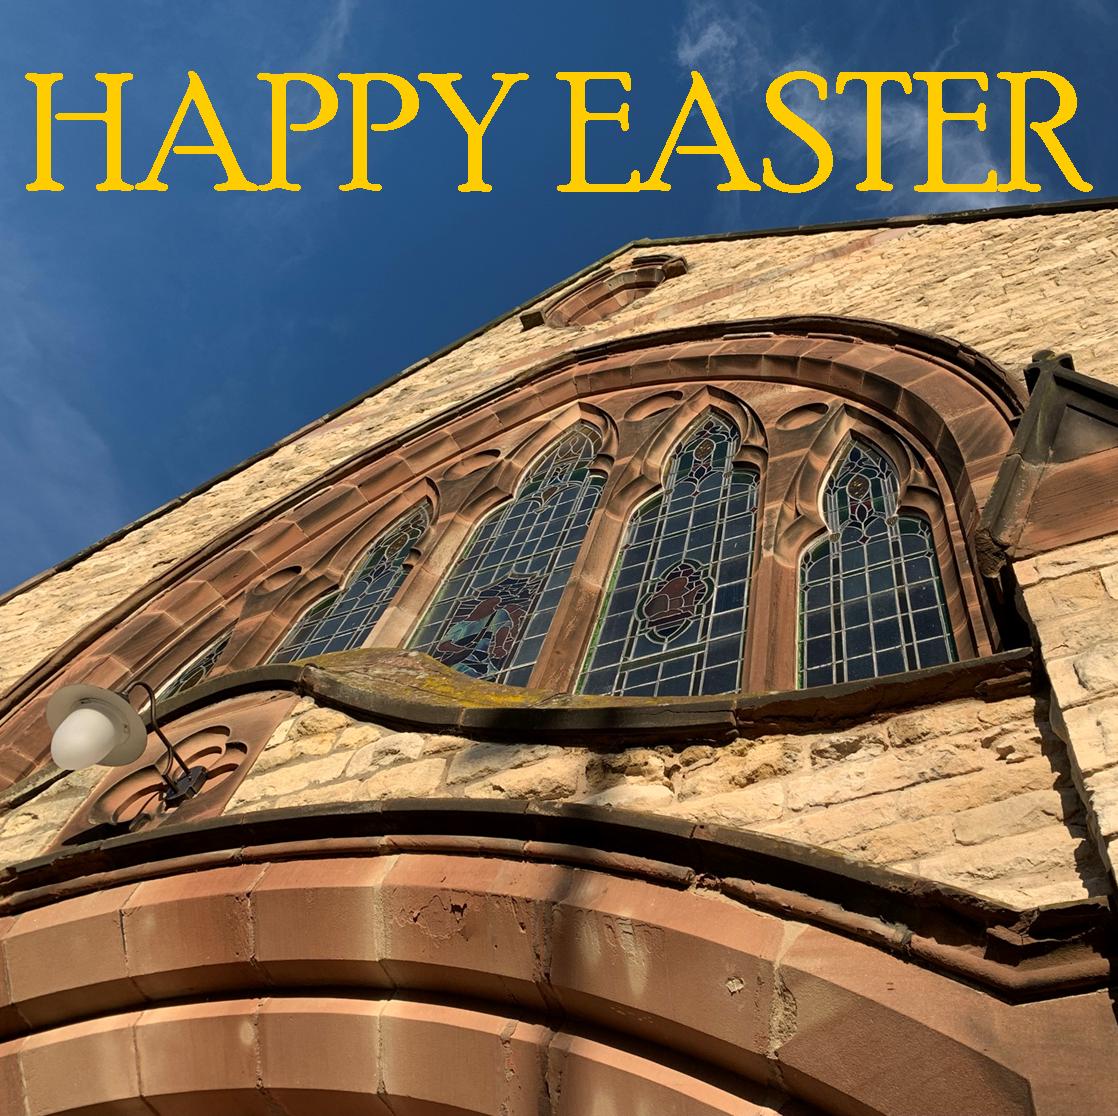 Wishing all who celebrate, a very Happy Easter... from our home to yours.
The Broadwood Family.
#easterblessings #happyeaster #petiteproperties #PPHQ #theoldmethodistchurch